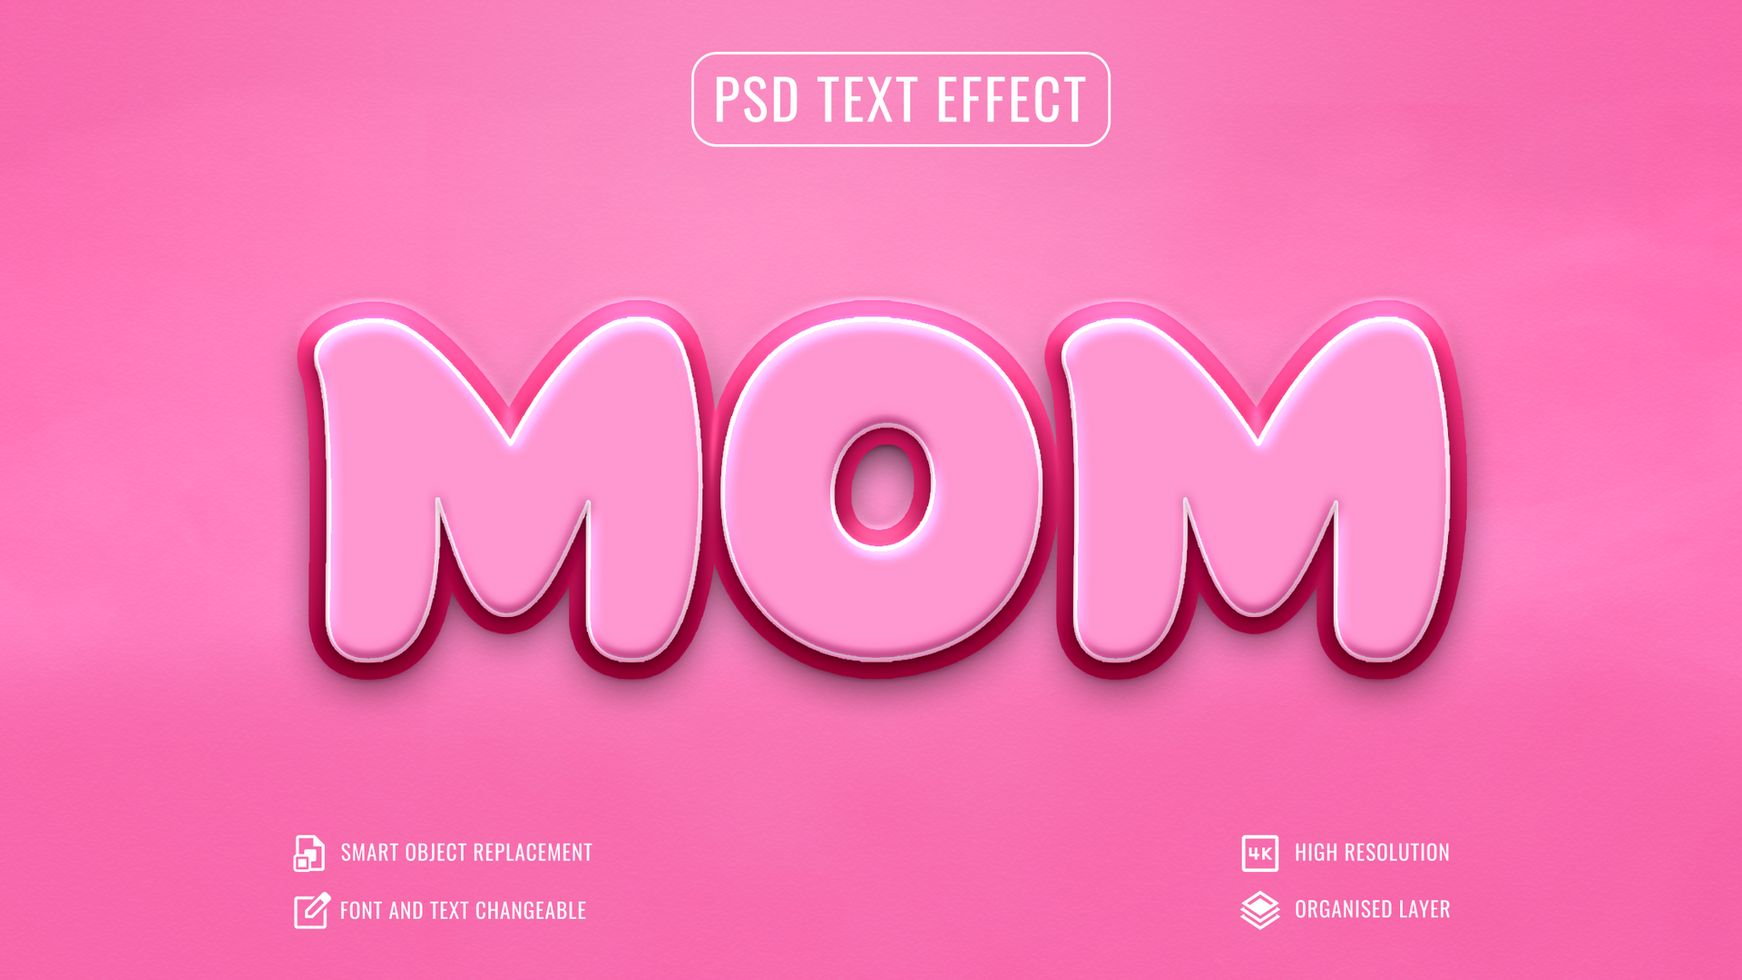 Mothers day editable 3d text effect psd